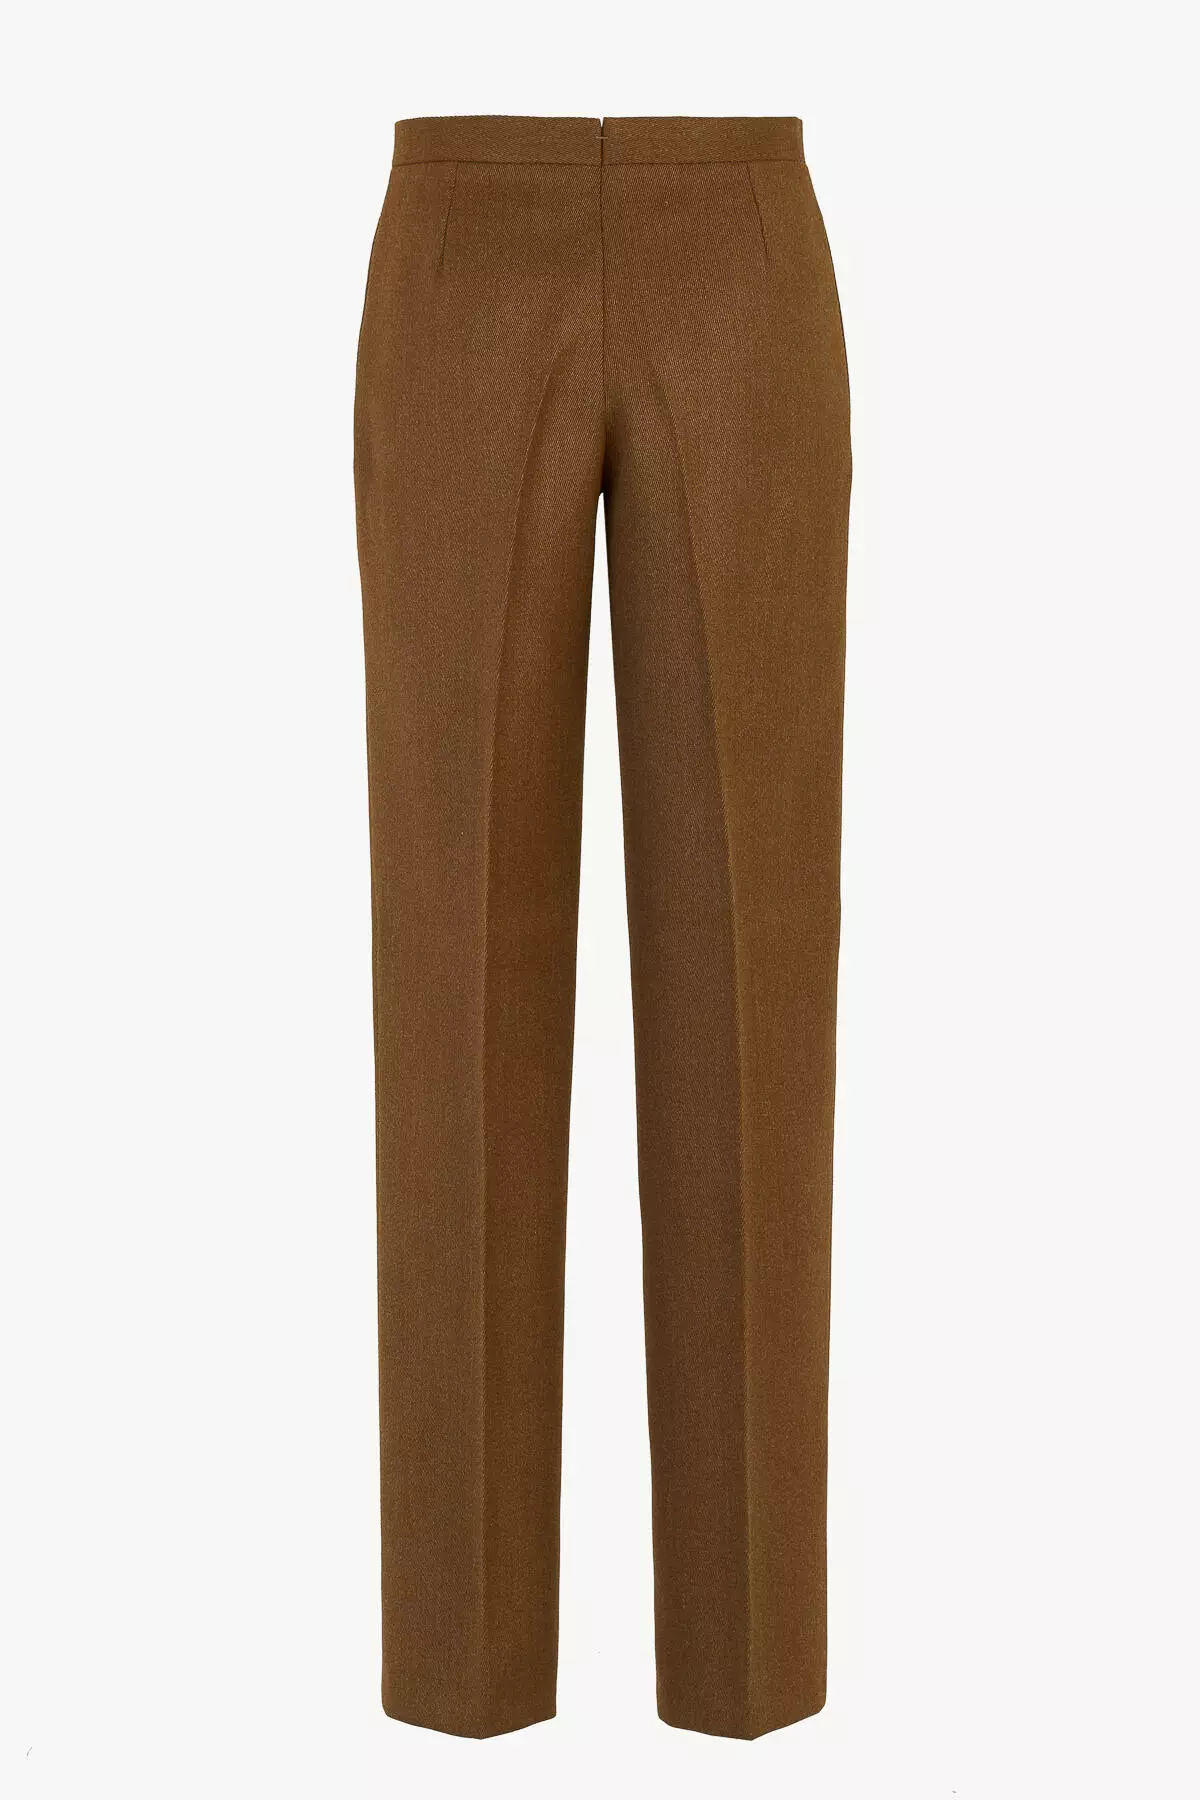 Janice Giuliva in Wool - Trousers Heritage Whipcord